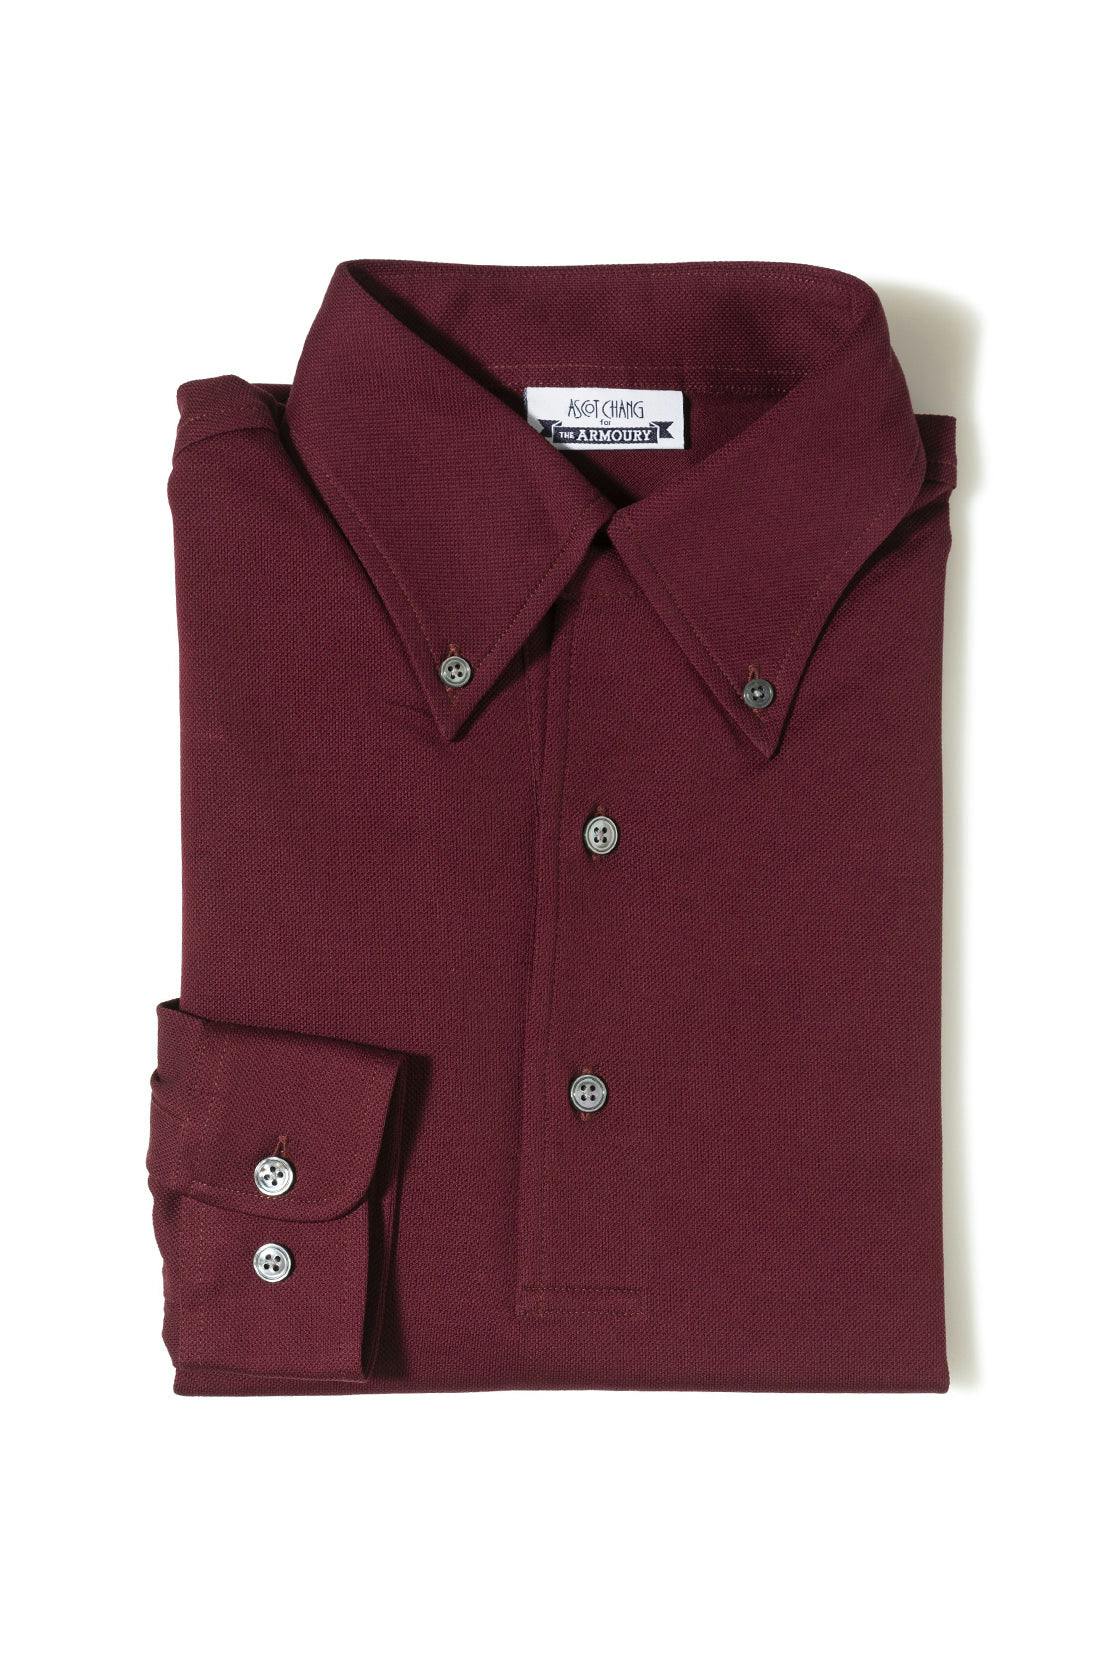 The Armoury by Ascot Chang Burgundy Long Sleeve Button Down Polo